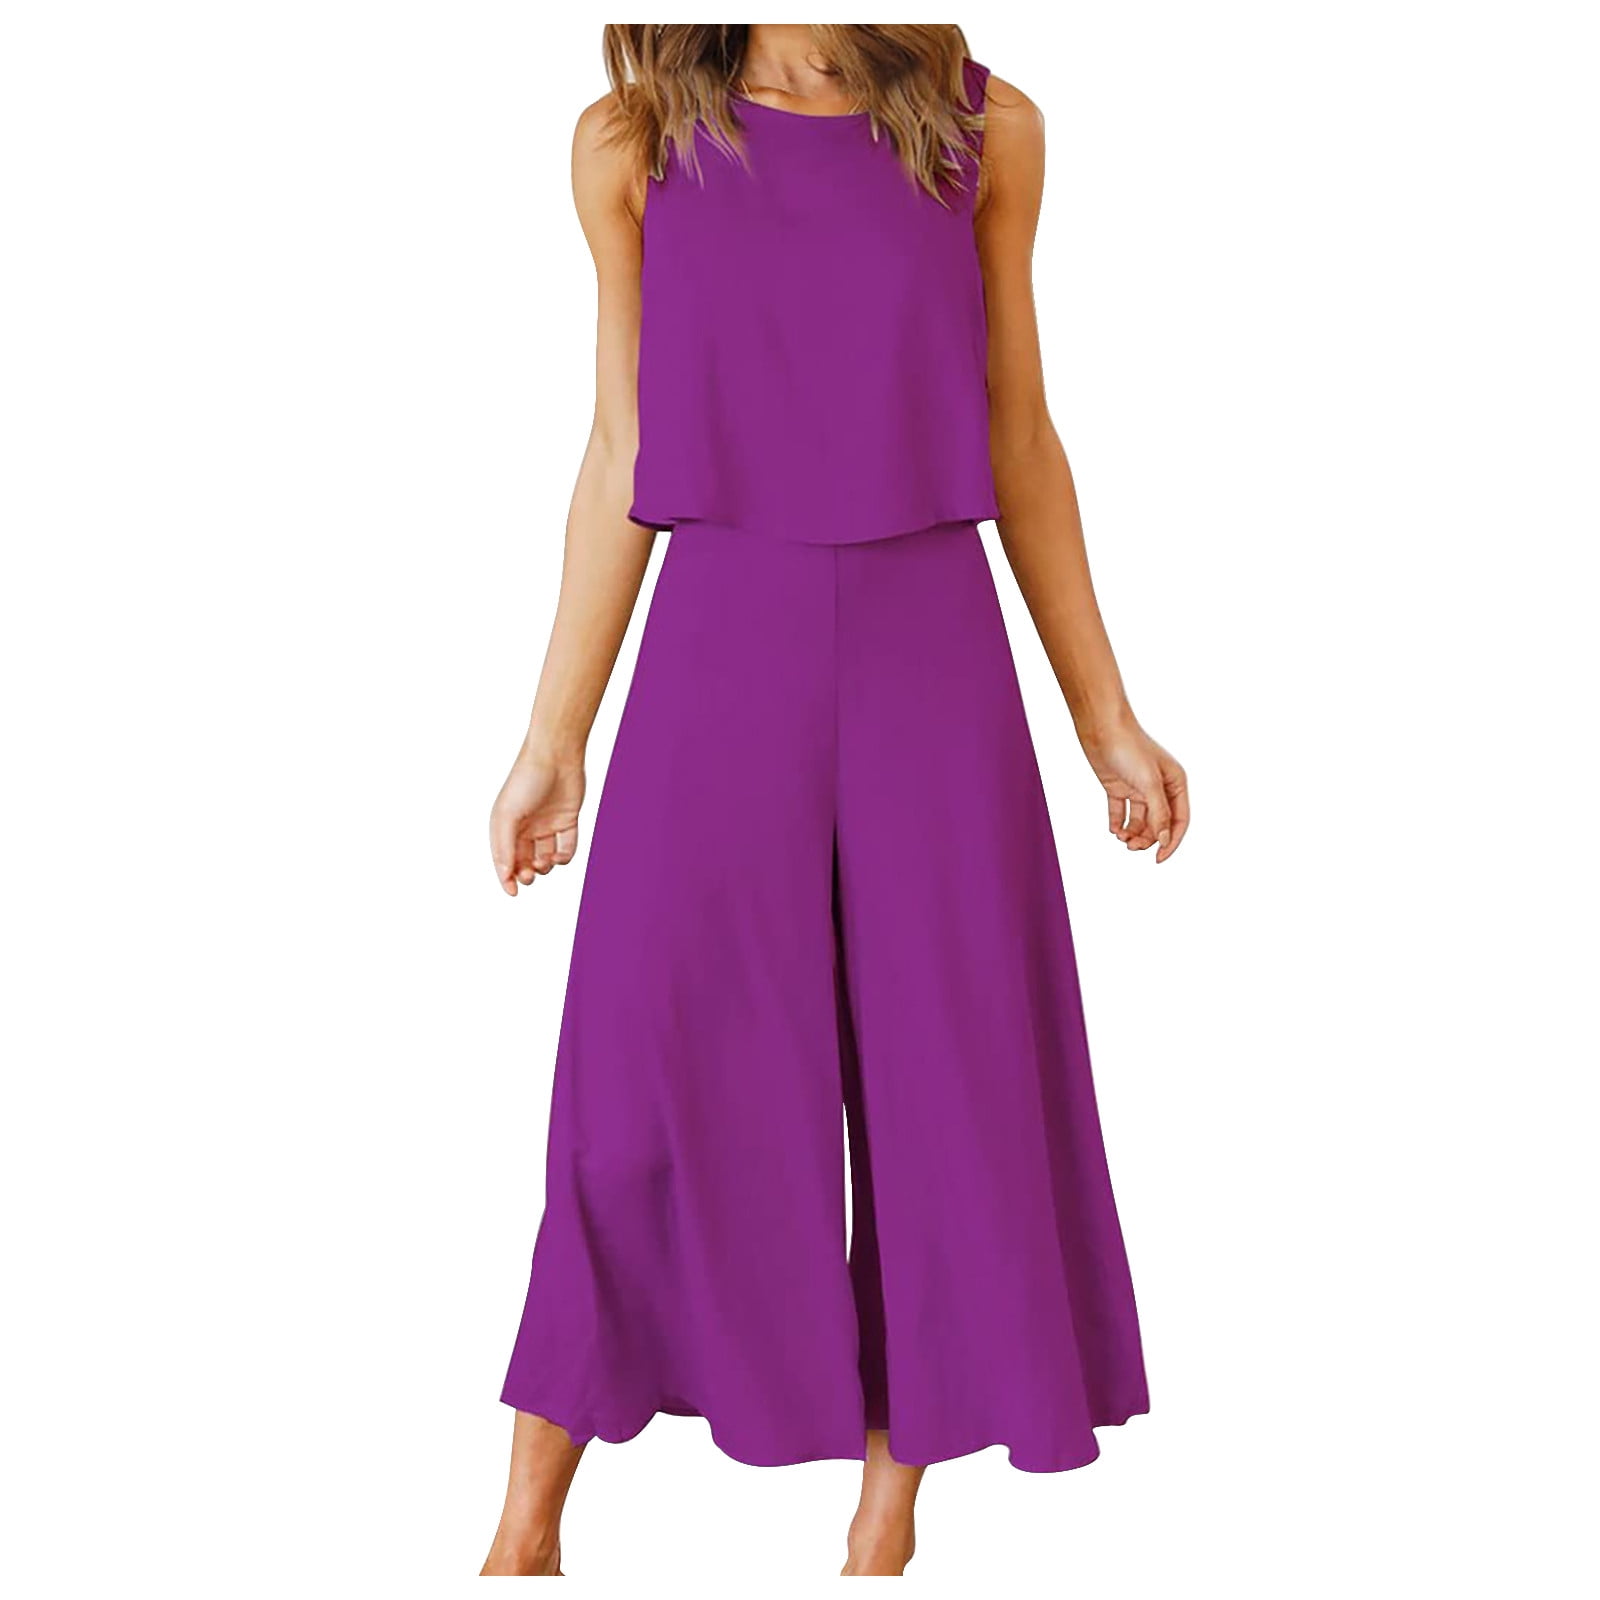 2 Piece Pants Sets for Women Dressy Casual Wide Leg Flowy Capri Pant and  Sleeveless Crop Tank Top Summer Outfits (X-Large, Purple) 